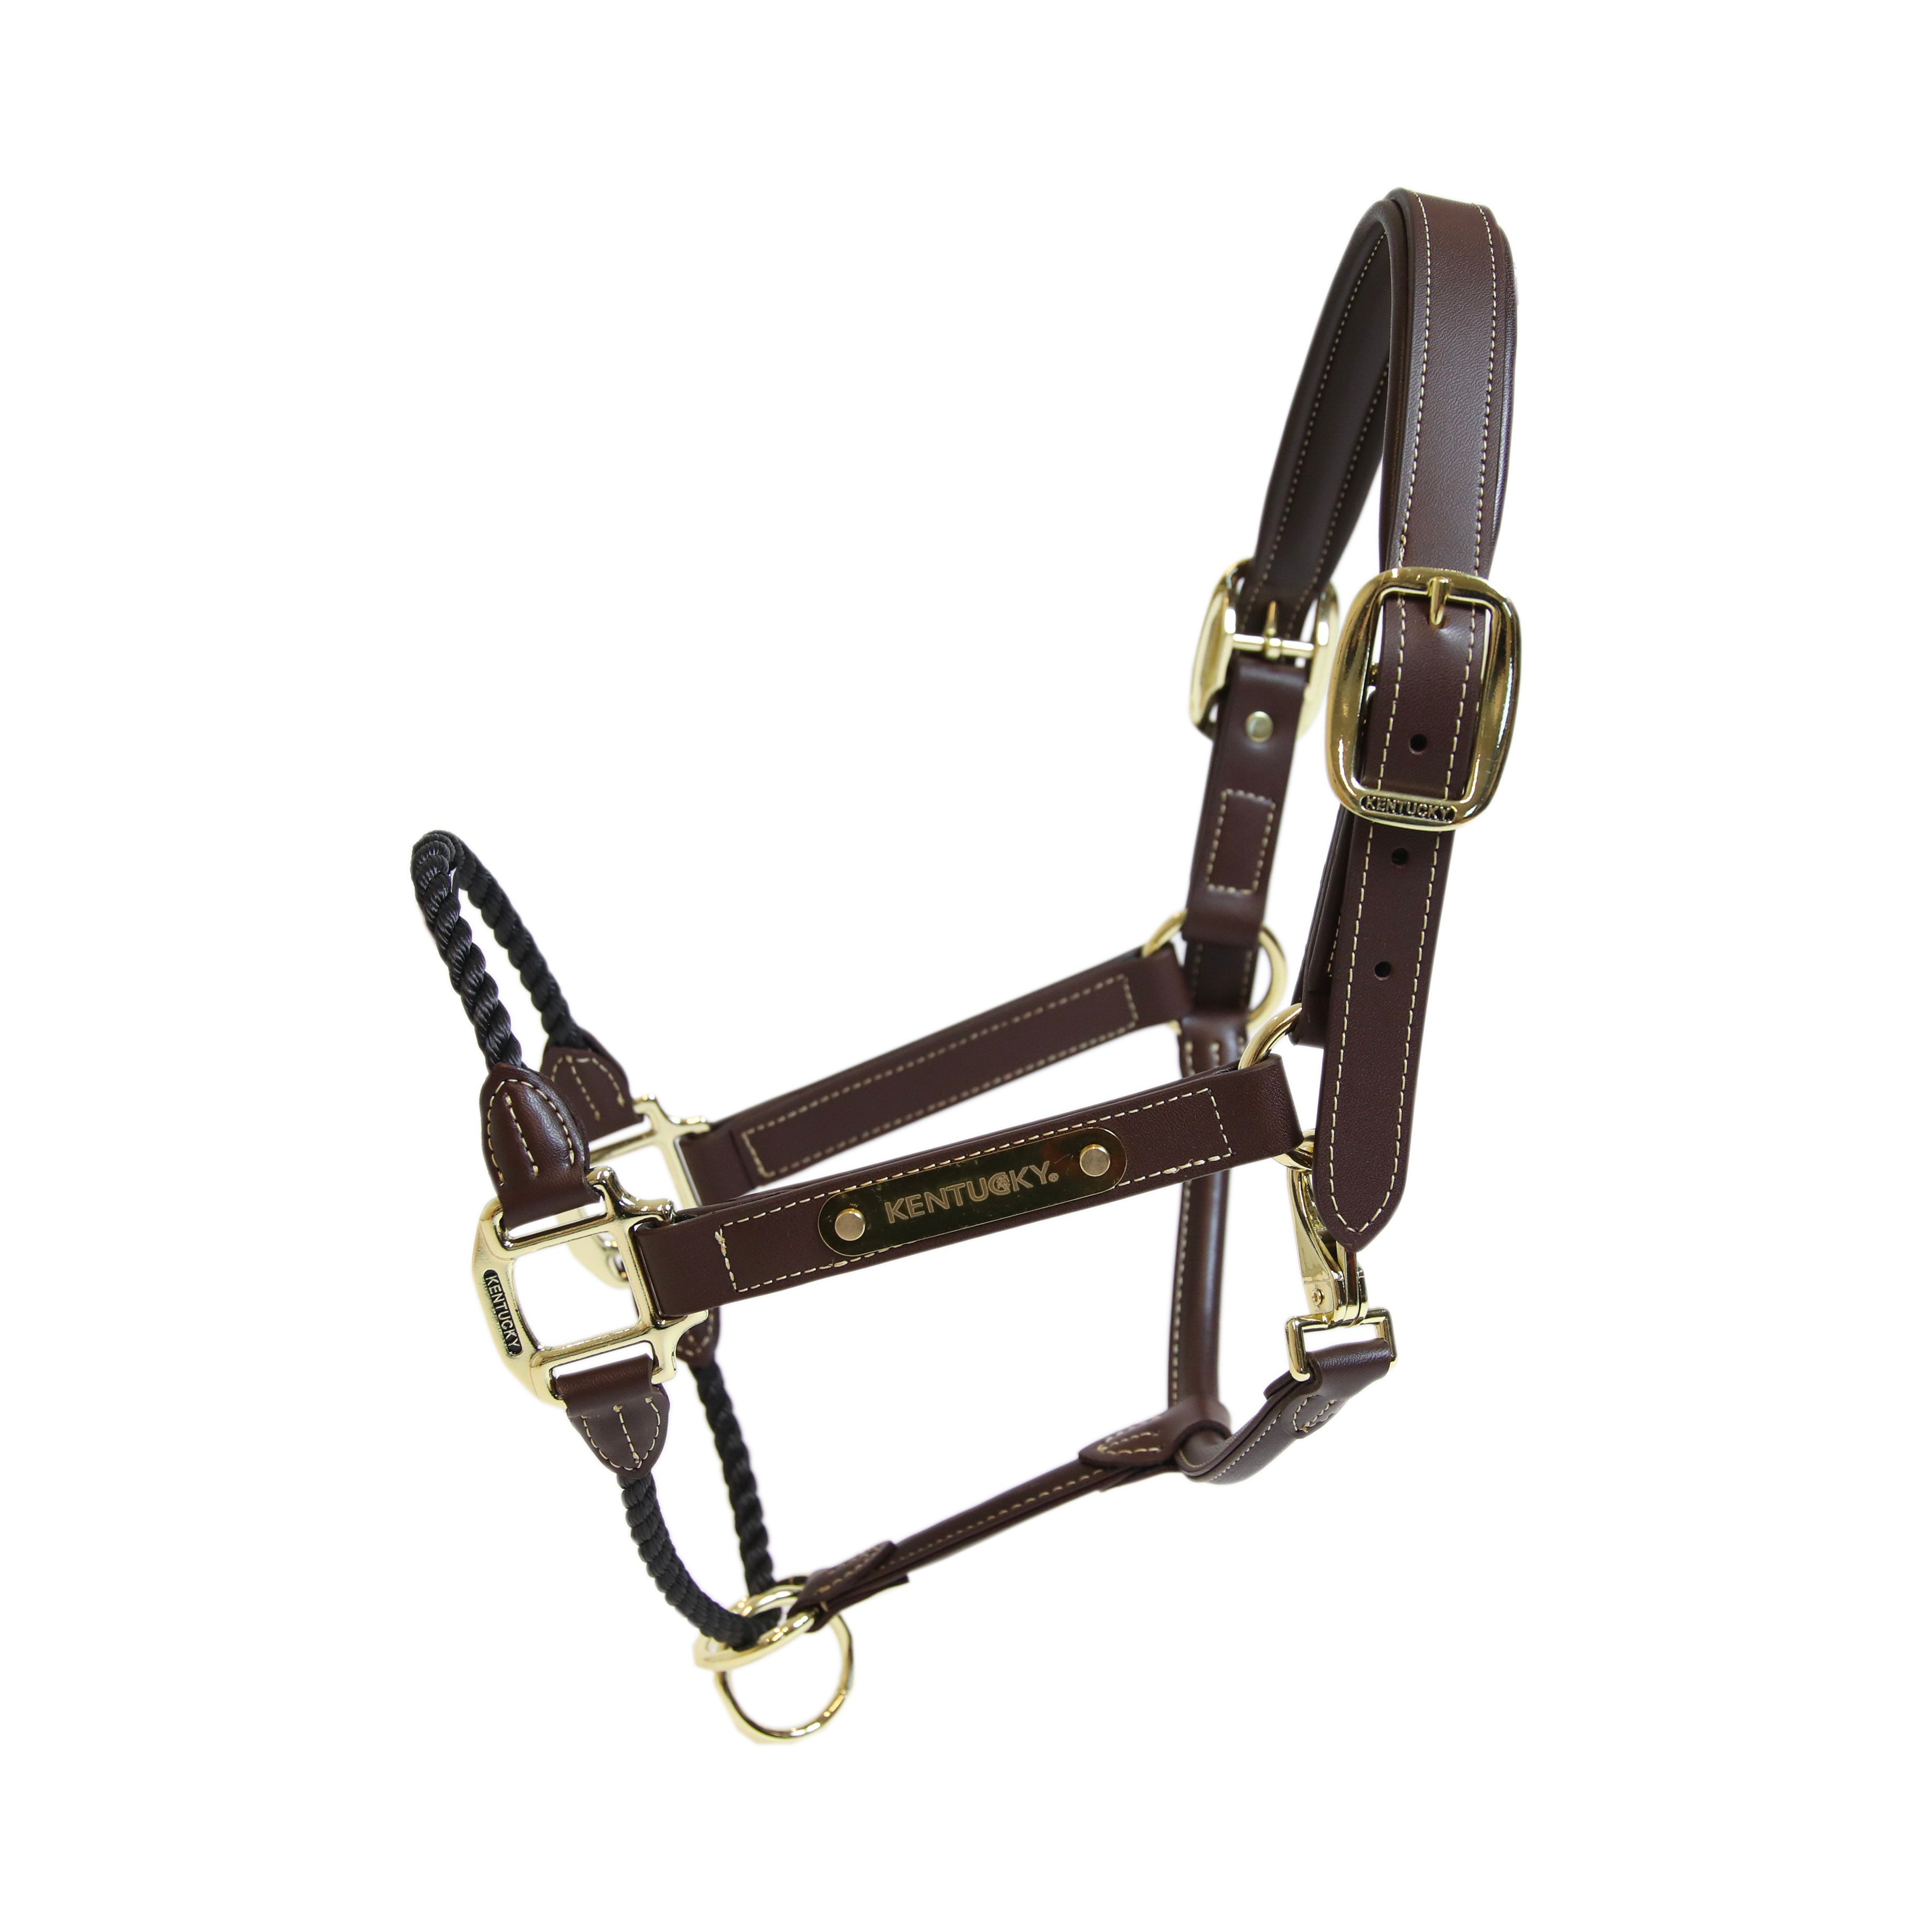 The Leather Rope Halter comes with a thick brown rope to replace the noseband. This rope helps to have more control with horses who tend to have a lot of character. The lower buckle includes a pressure system that will tighten and ensure extra safety if the horse pulls too much.